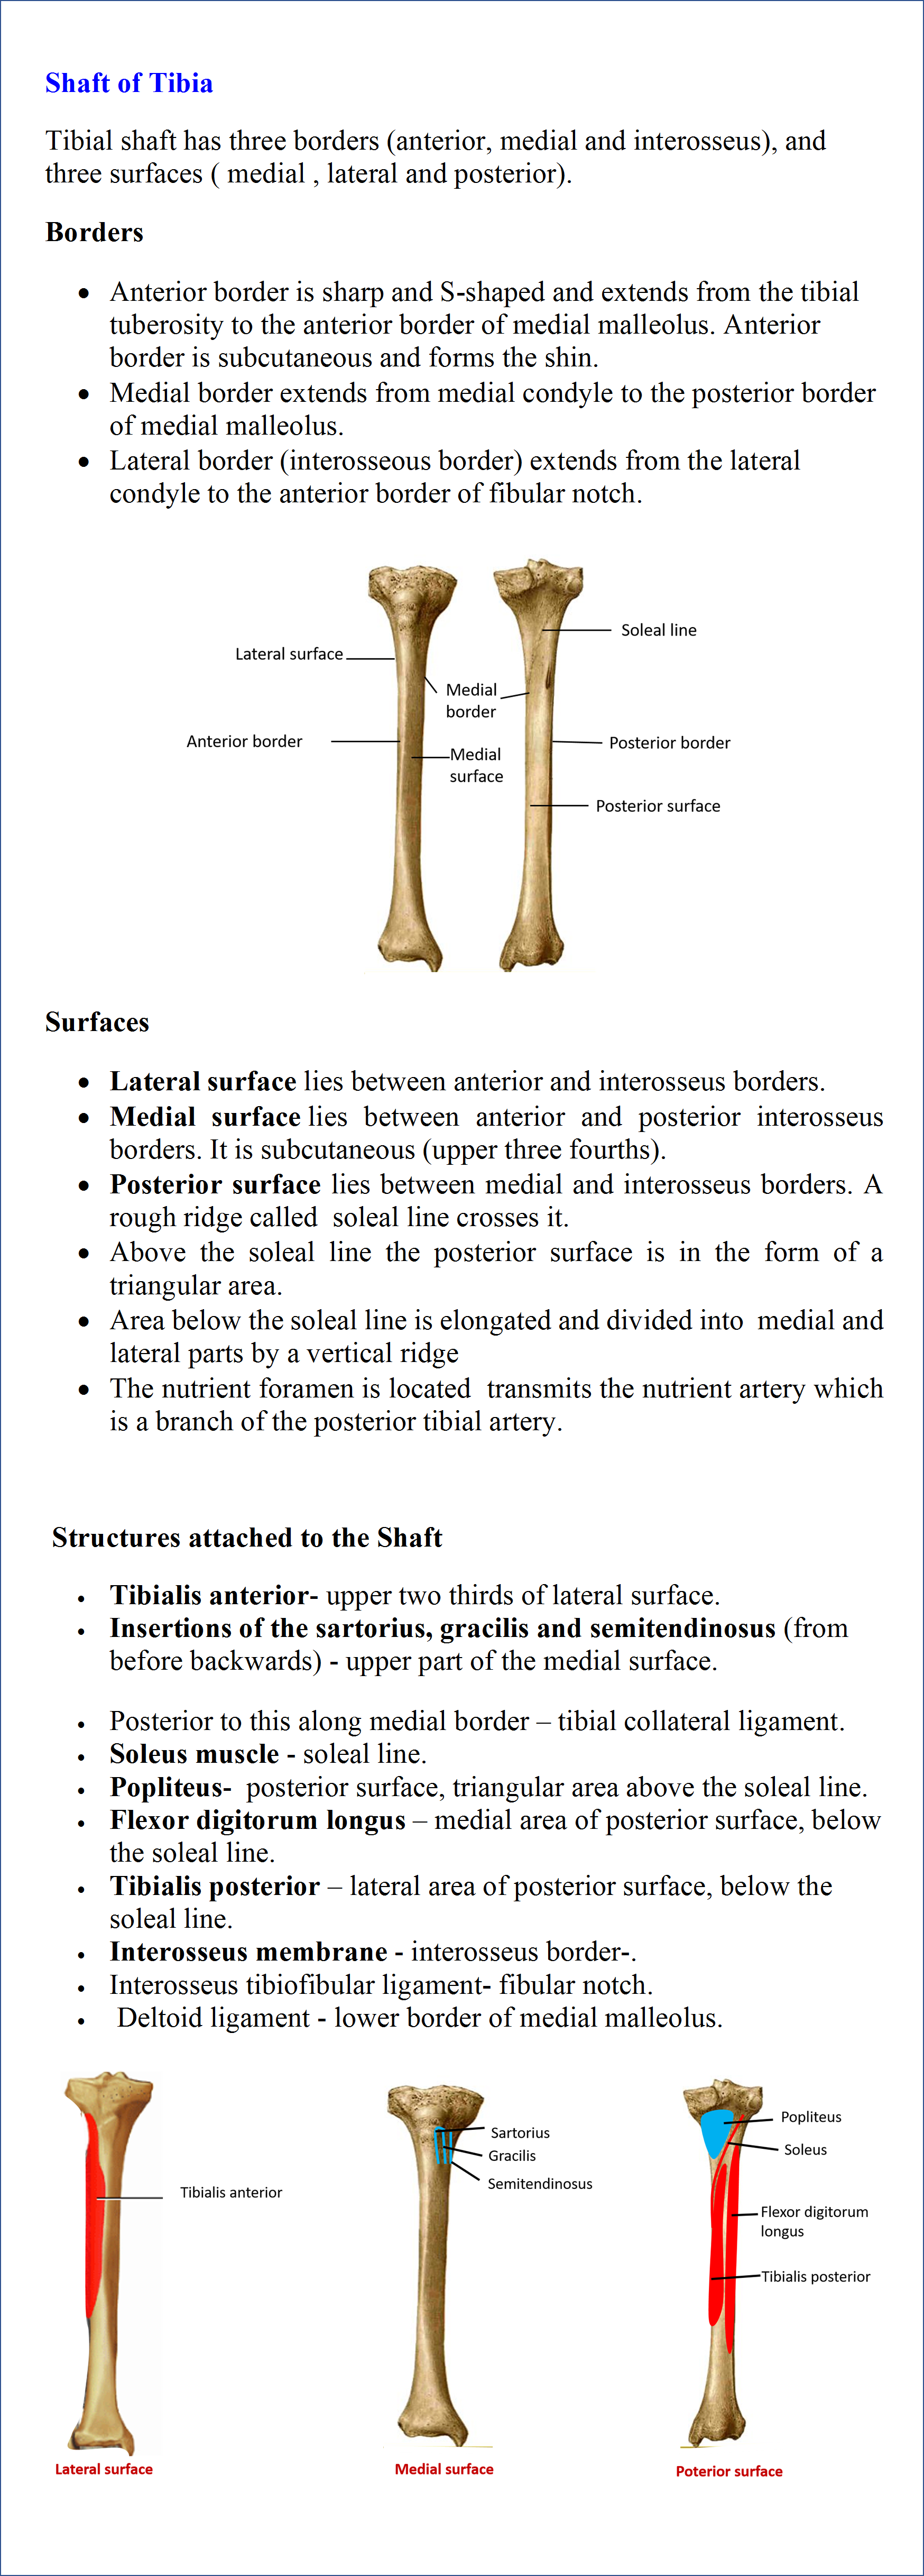 Shaft of tibia- Borders, Surfaces and Muscle Attachments